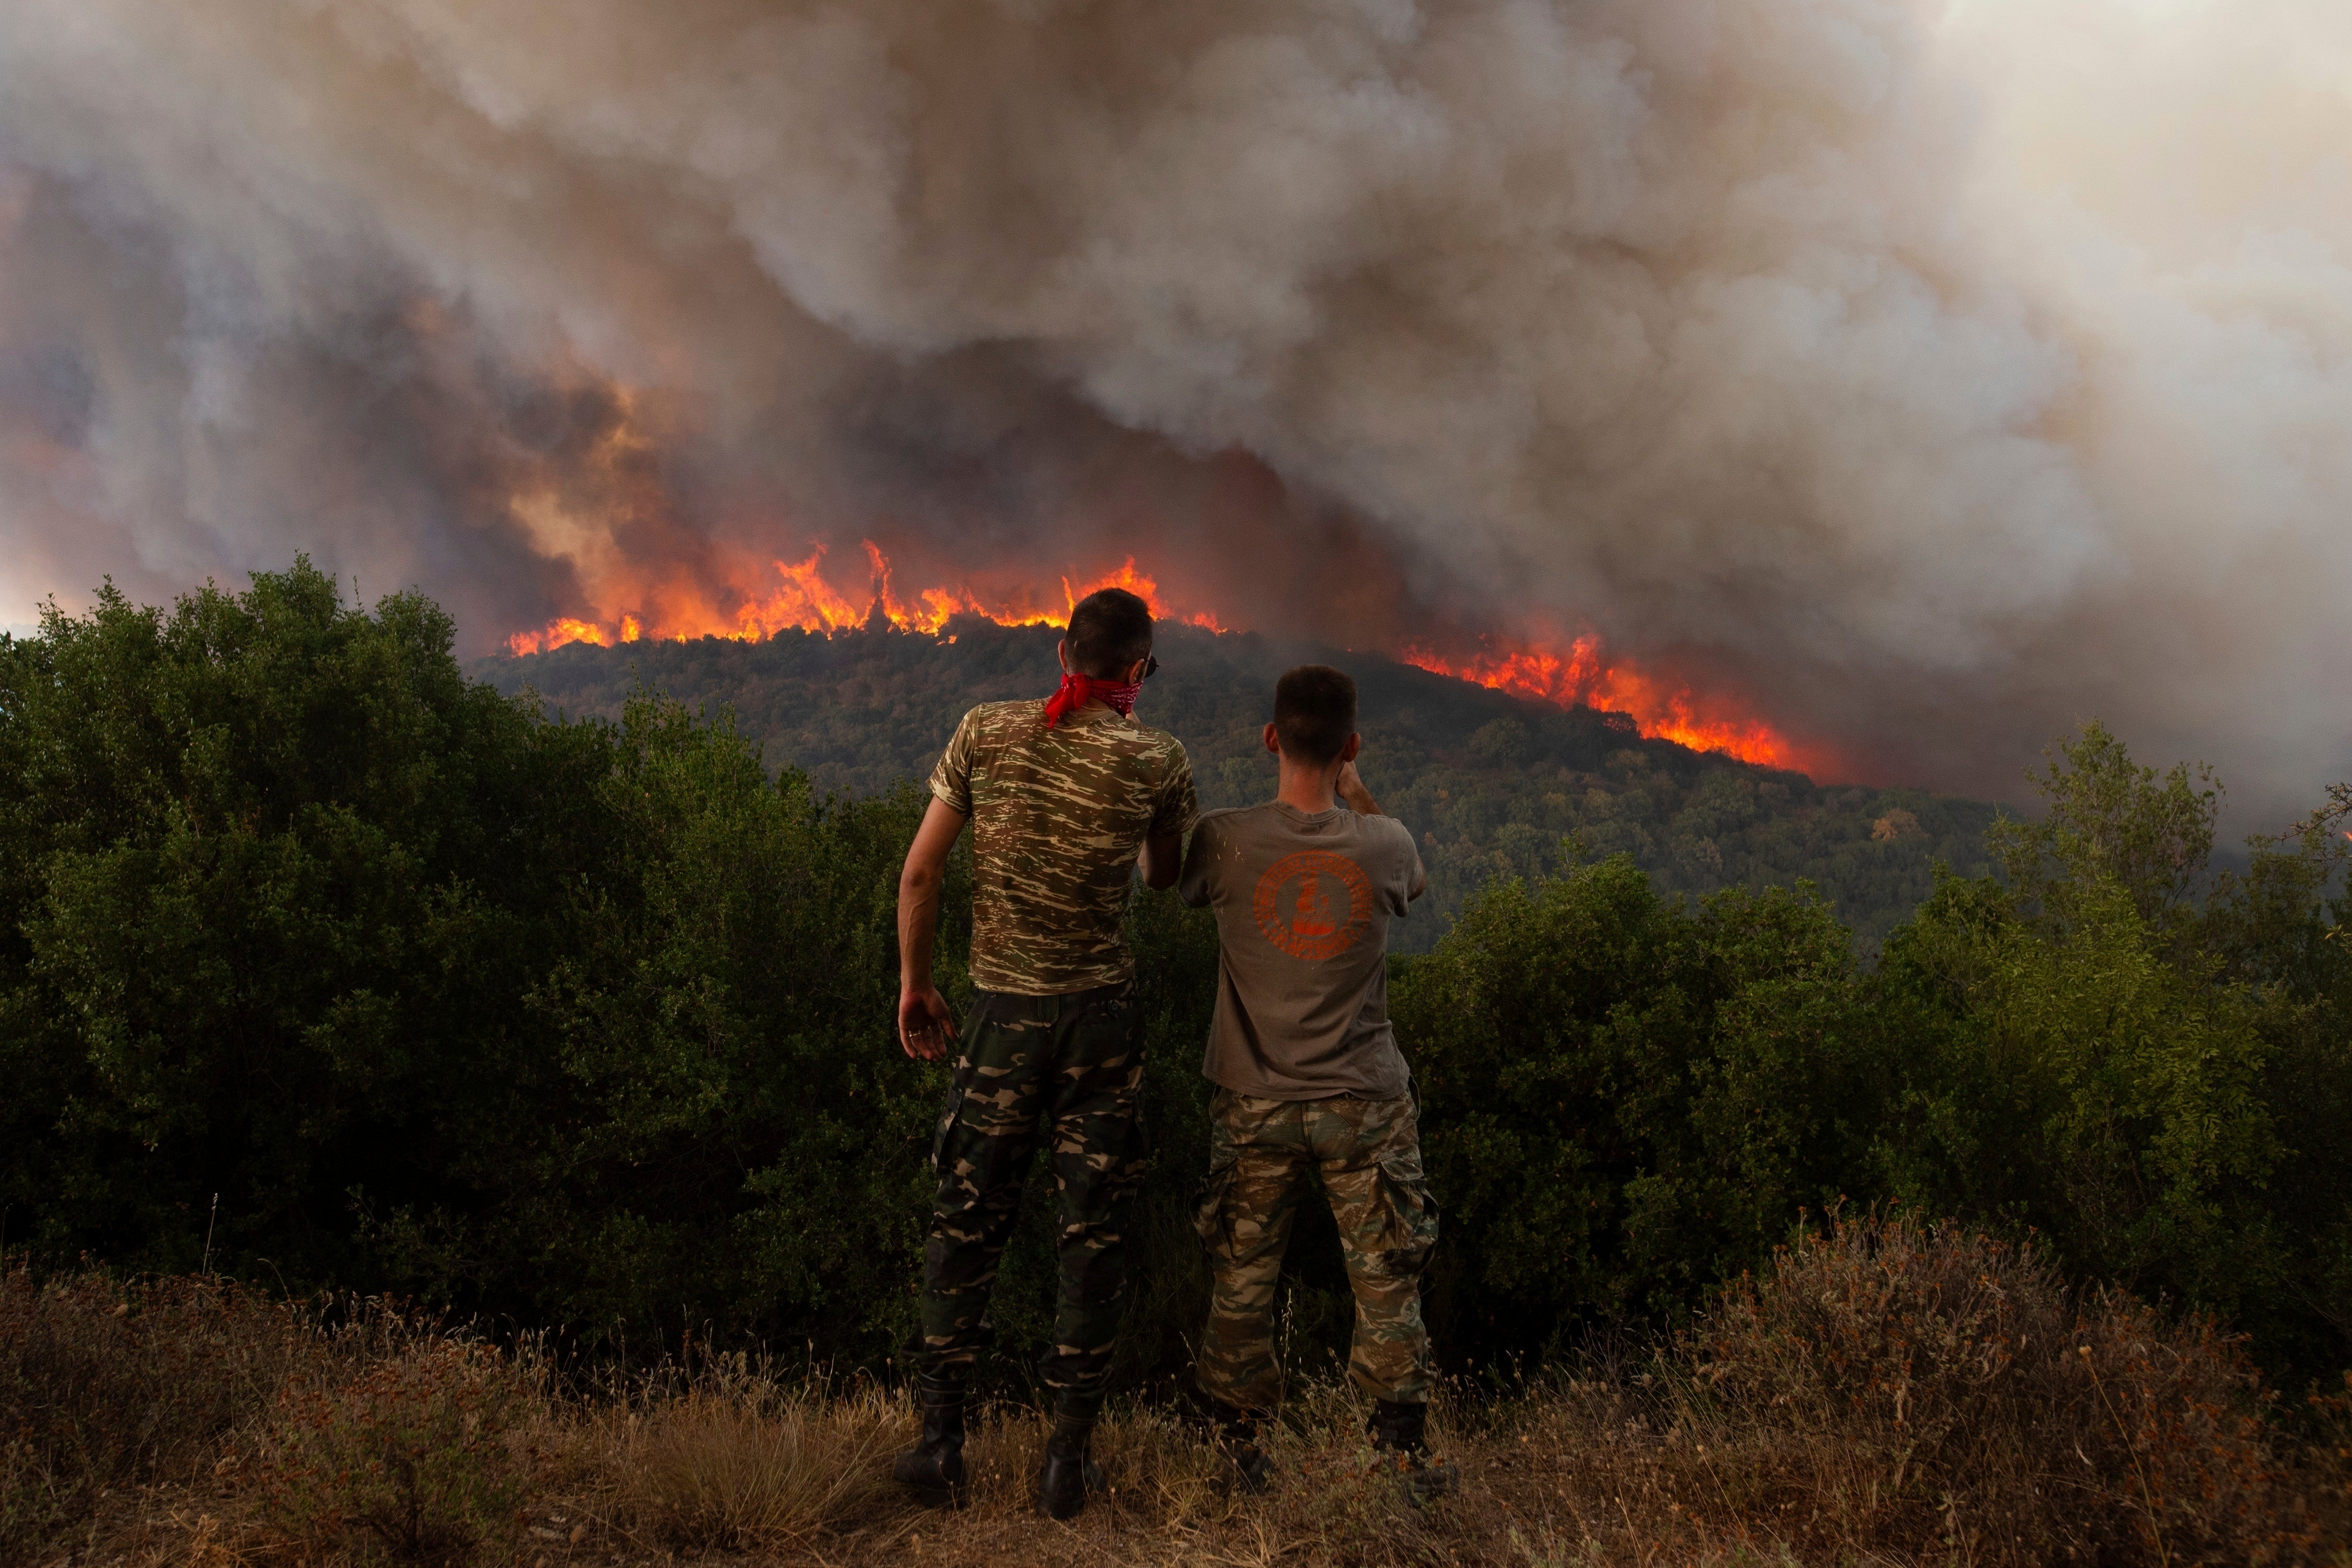 Flames burn through a forest during the wildfires in Greece last year